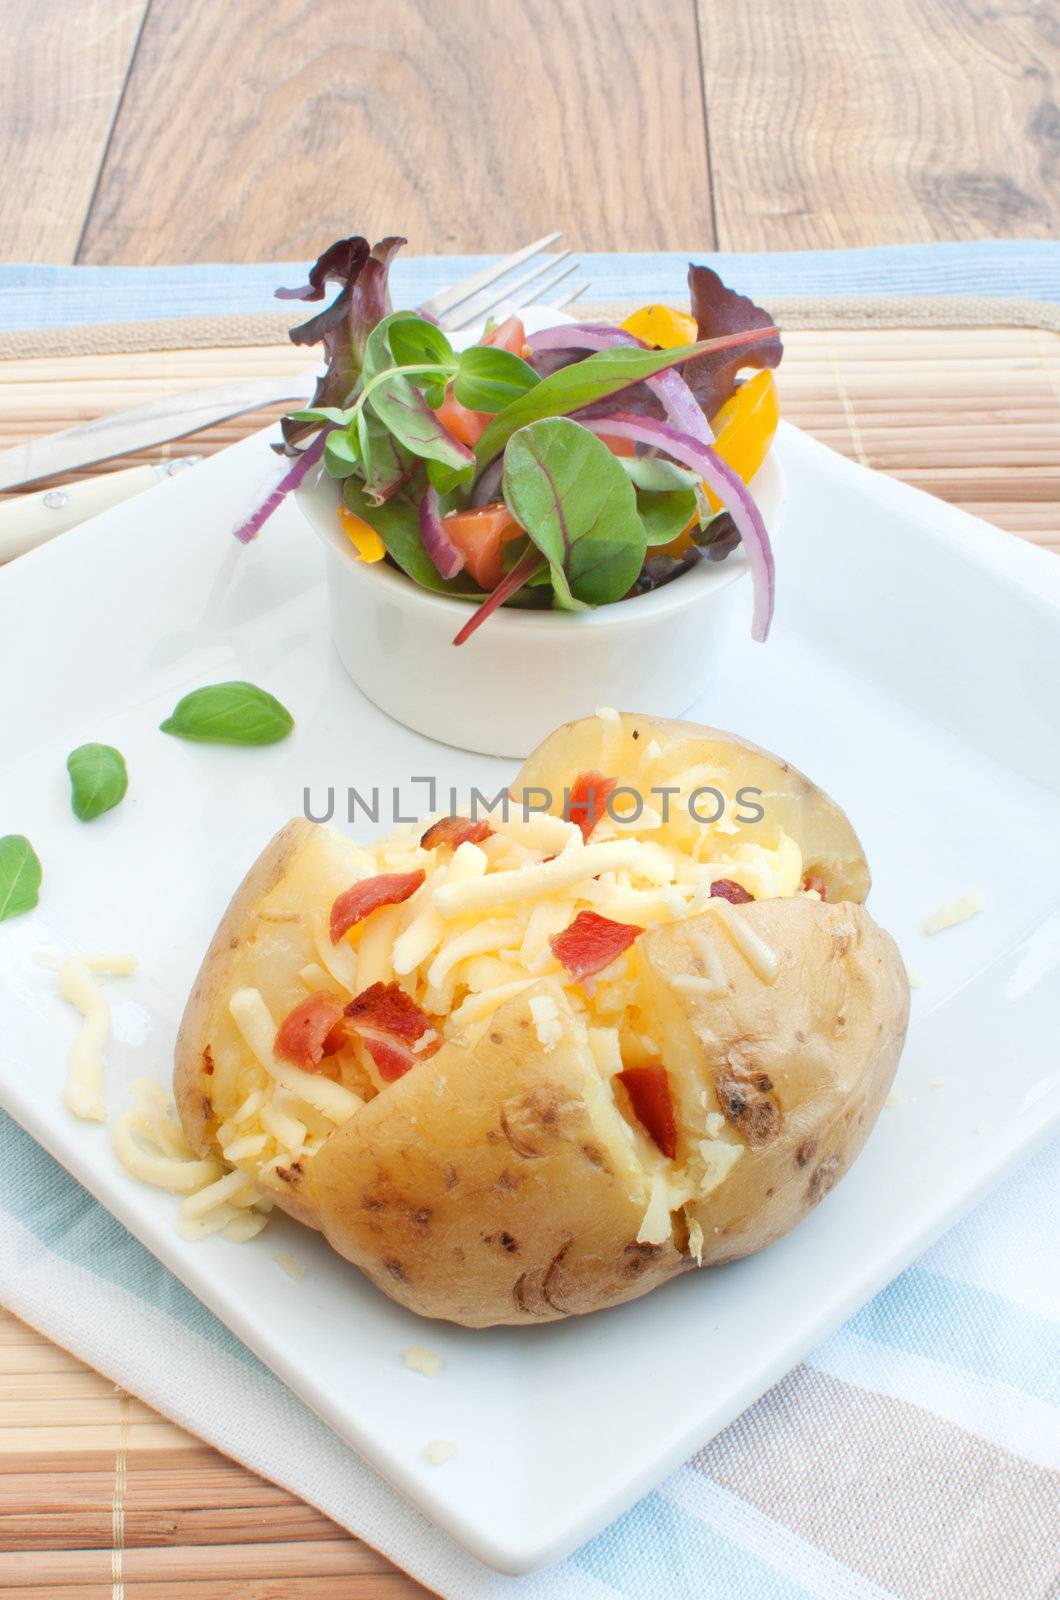 Melting cheese and bacon pieces with baked potato and salad in a bowl